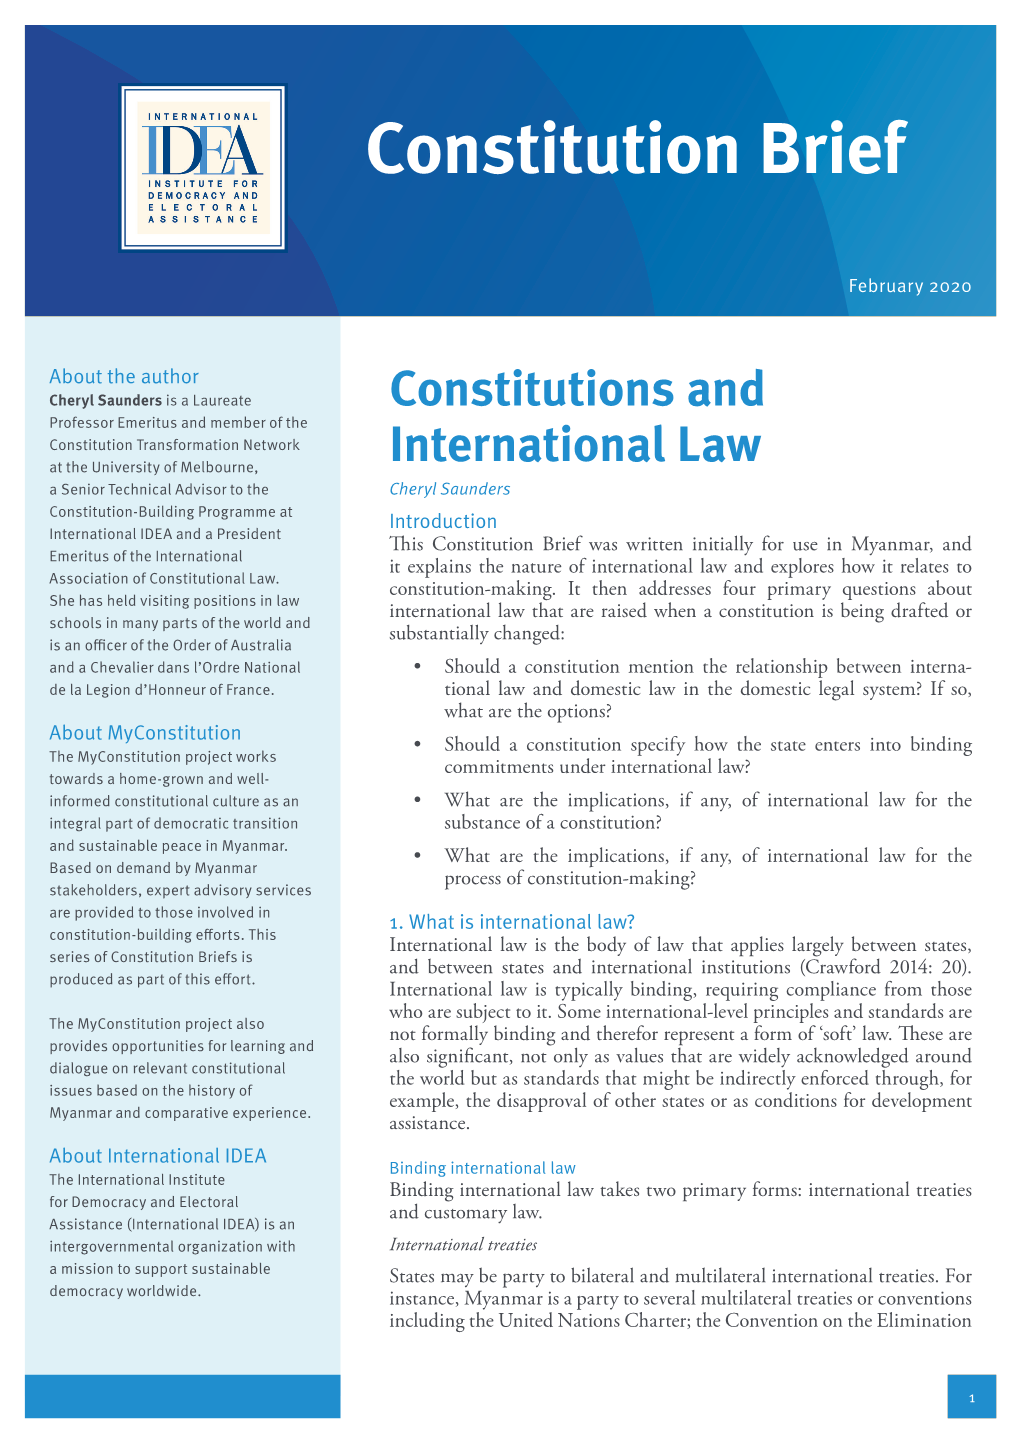 Constitutions and International